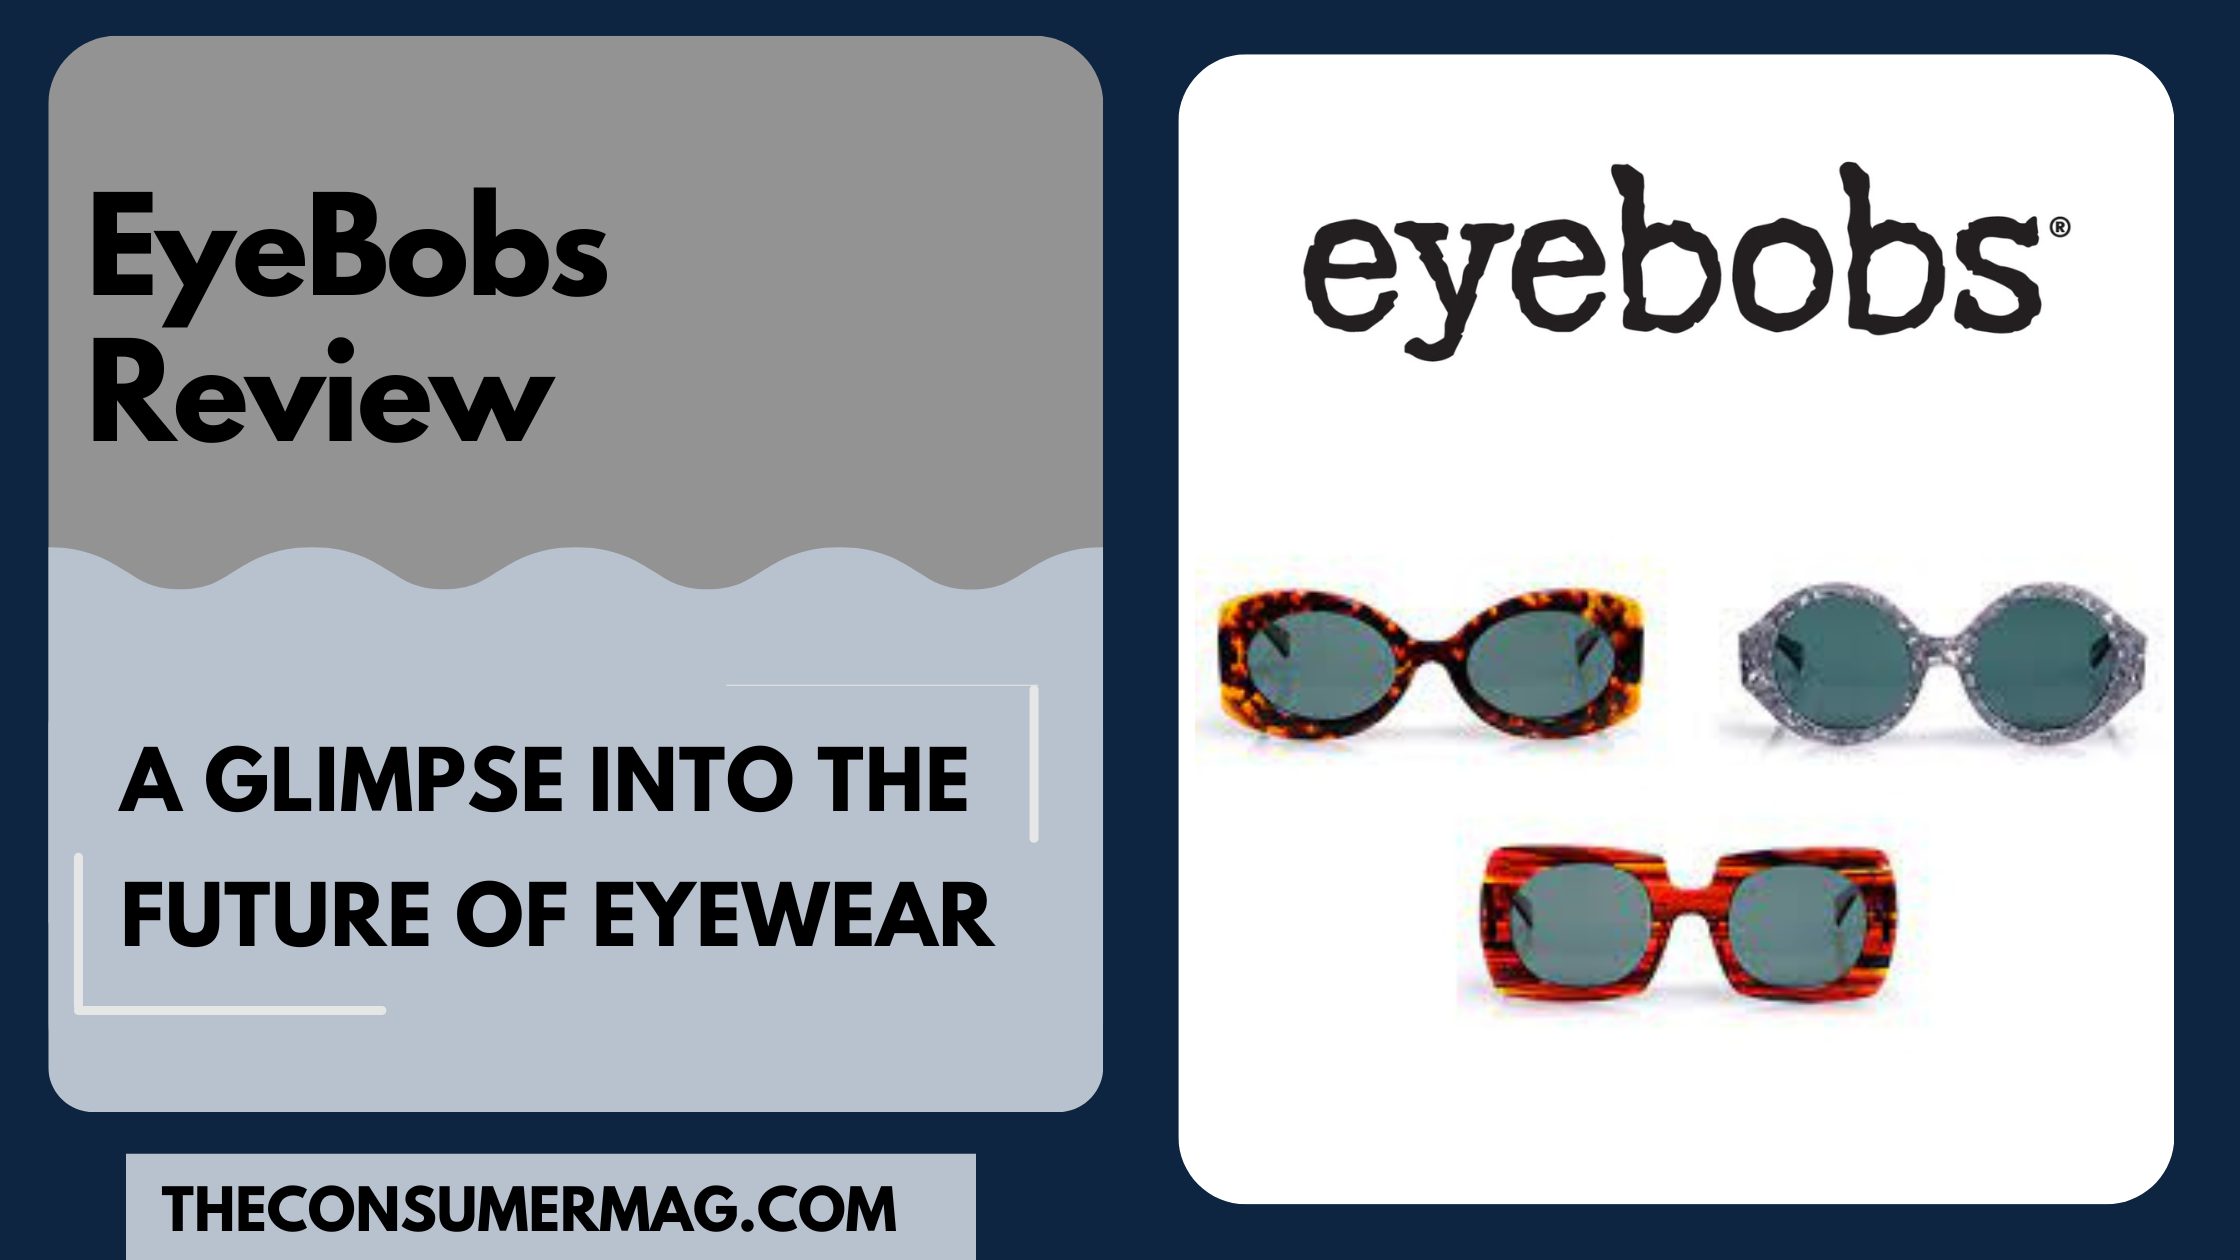 EyeBobs featured image